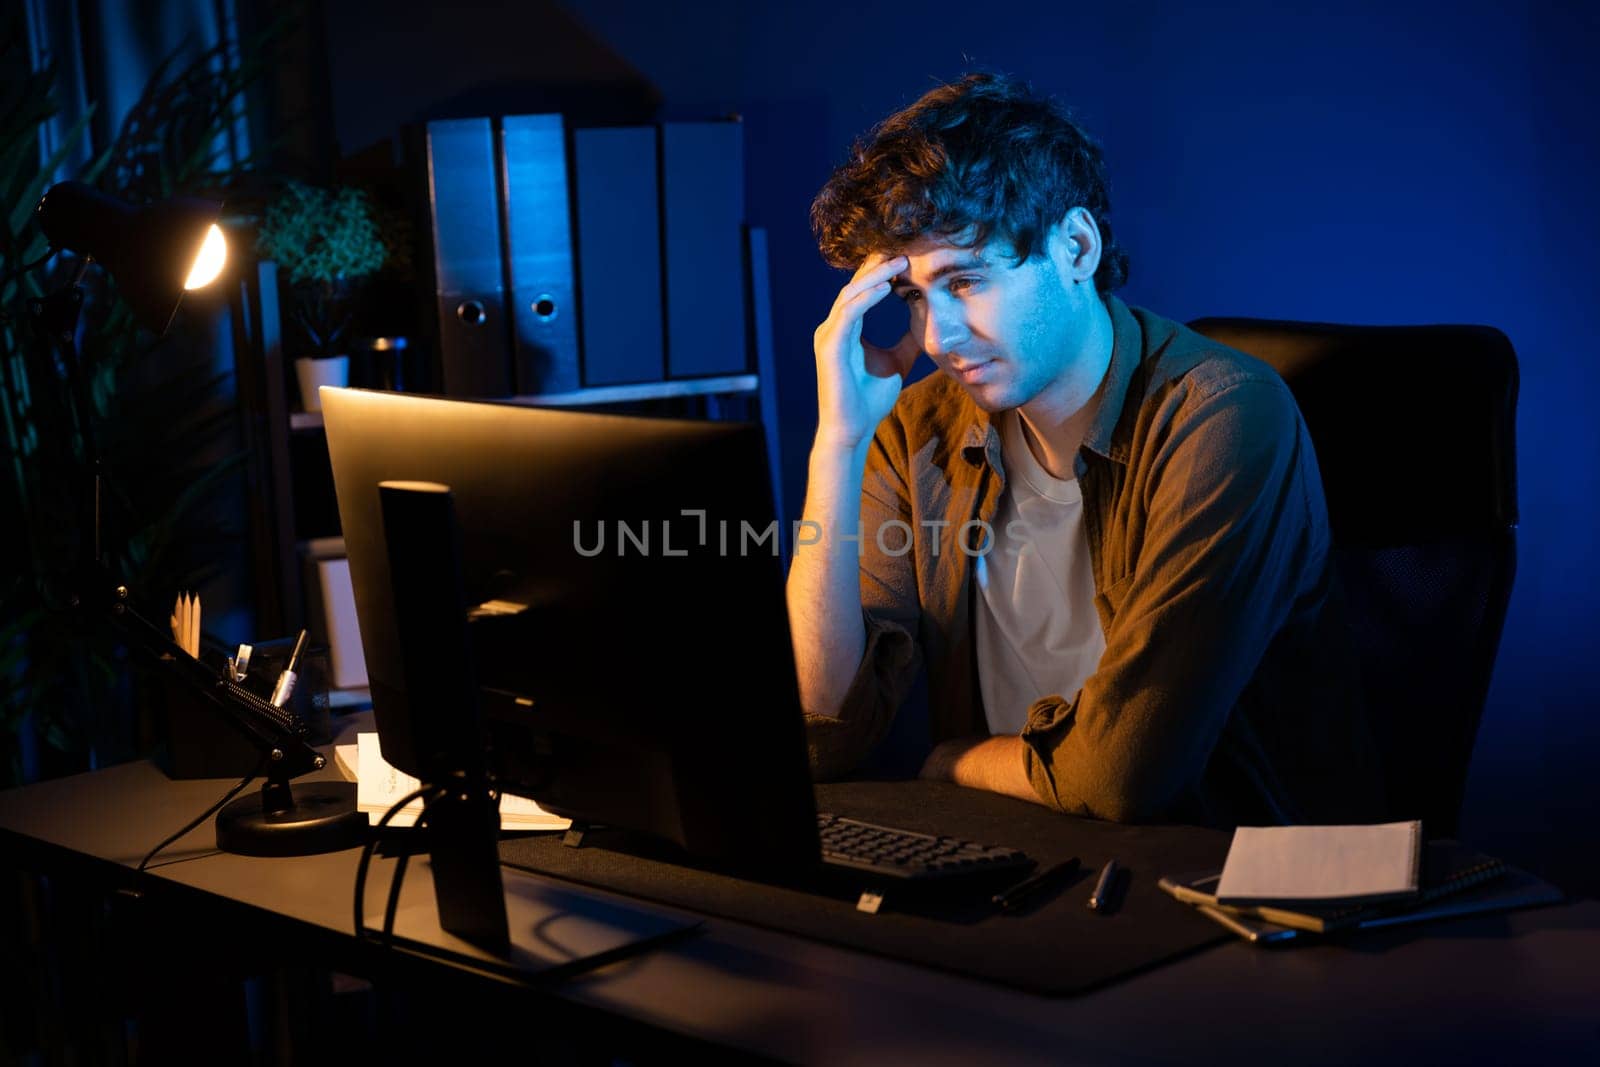 Stressful creative manager searching design thinking with new presentation while waiting email sending back on laptop screen at home office in casual shirt at neon light room at night time. Gusher.